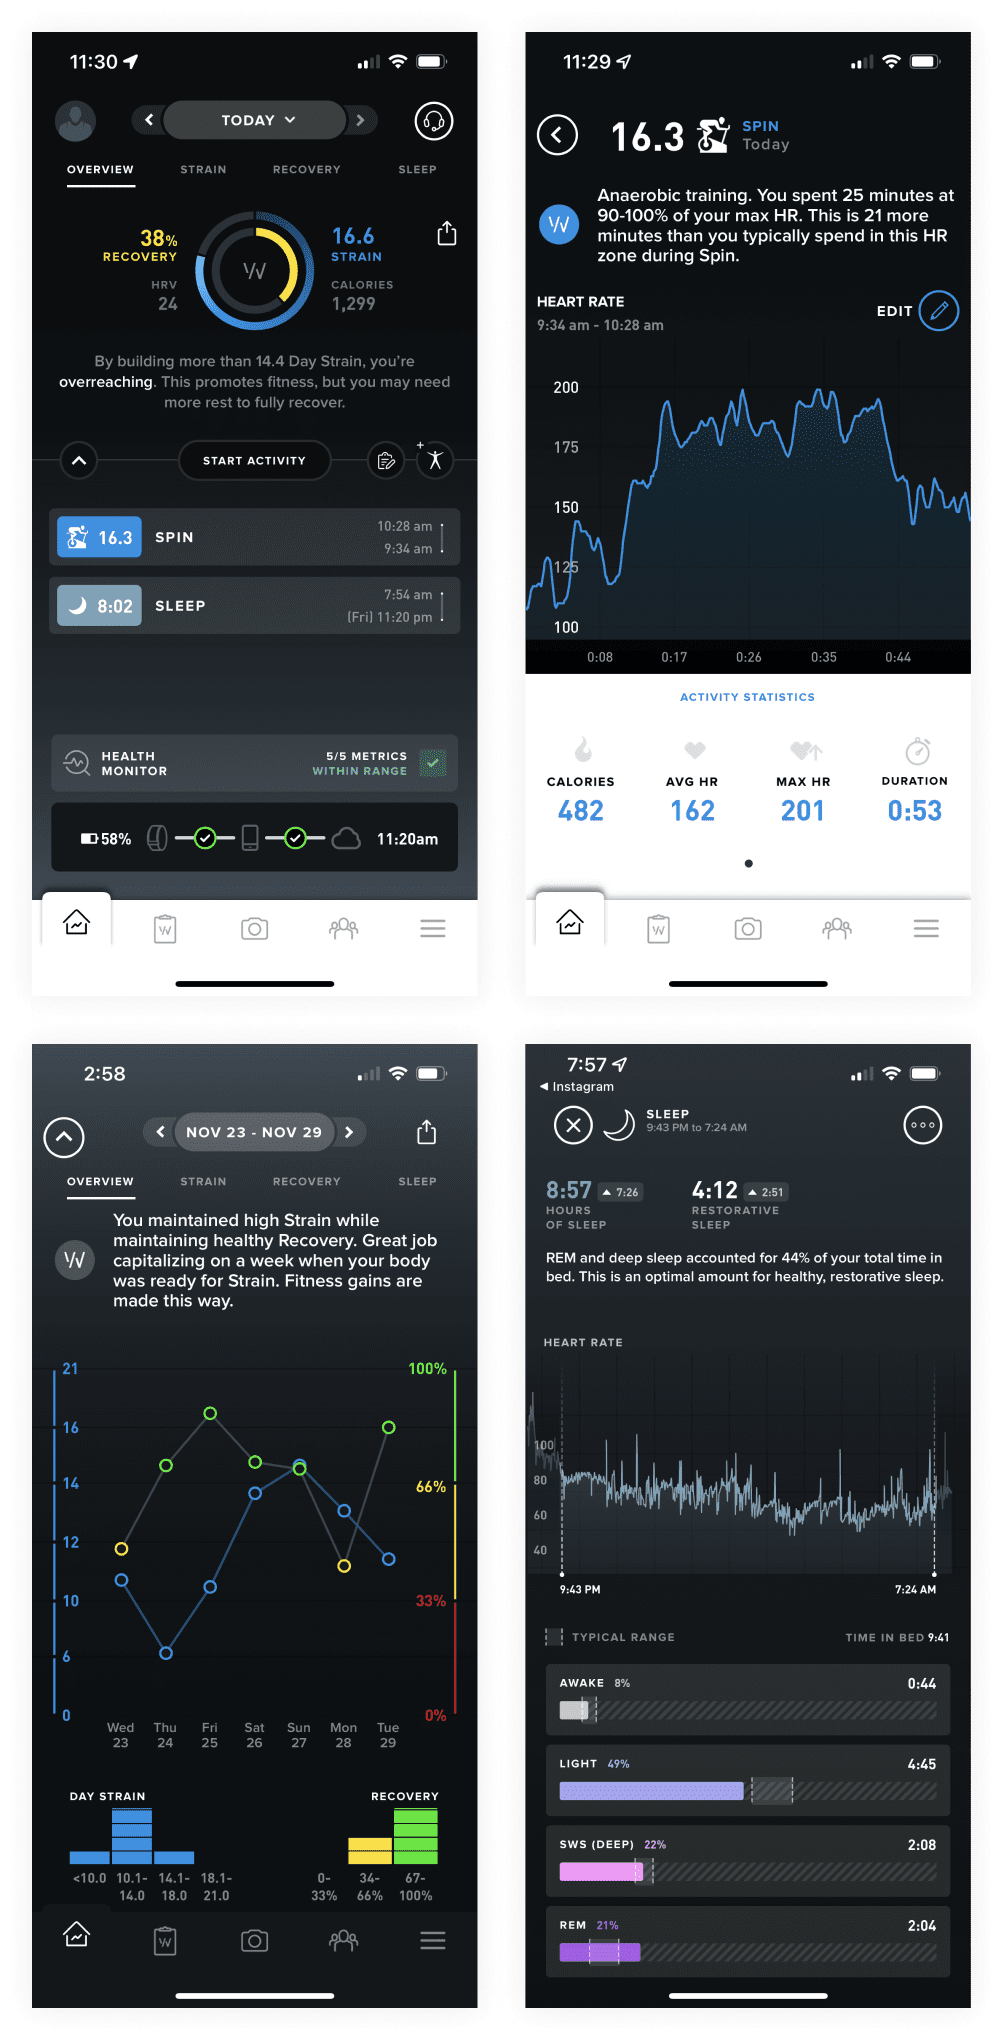 Whoop app UI of the Home dashboard, the activity detail screen which shows a graph of my heart rate during the activity, a strain/recovery graph overview that shows how my strain and recovery match up to each other, and a sleep detail screen showing my sleep phases and heart rate during sleep